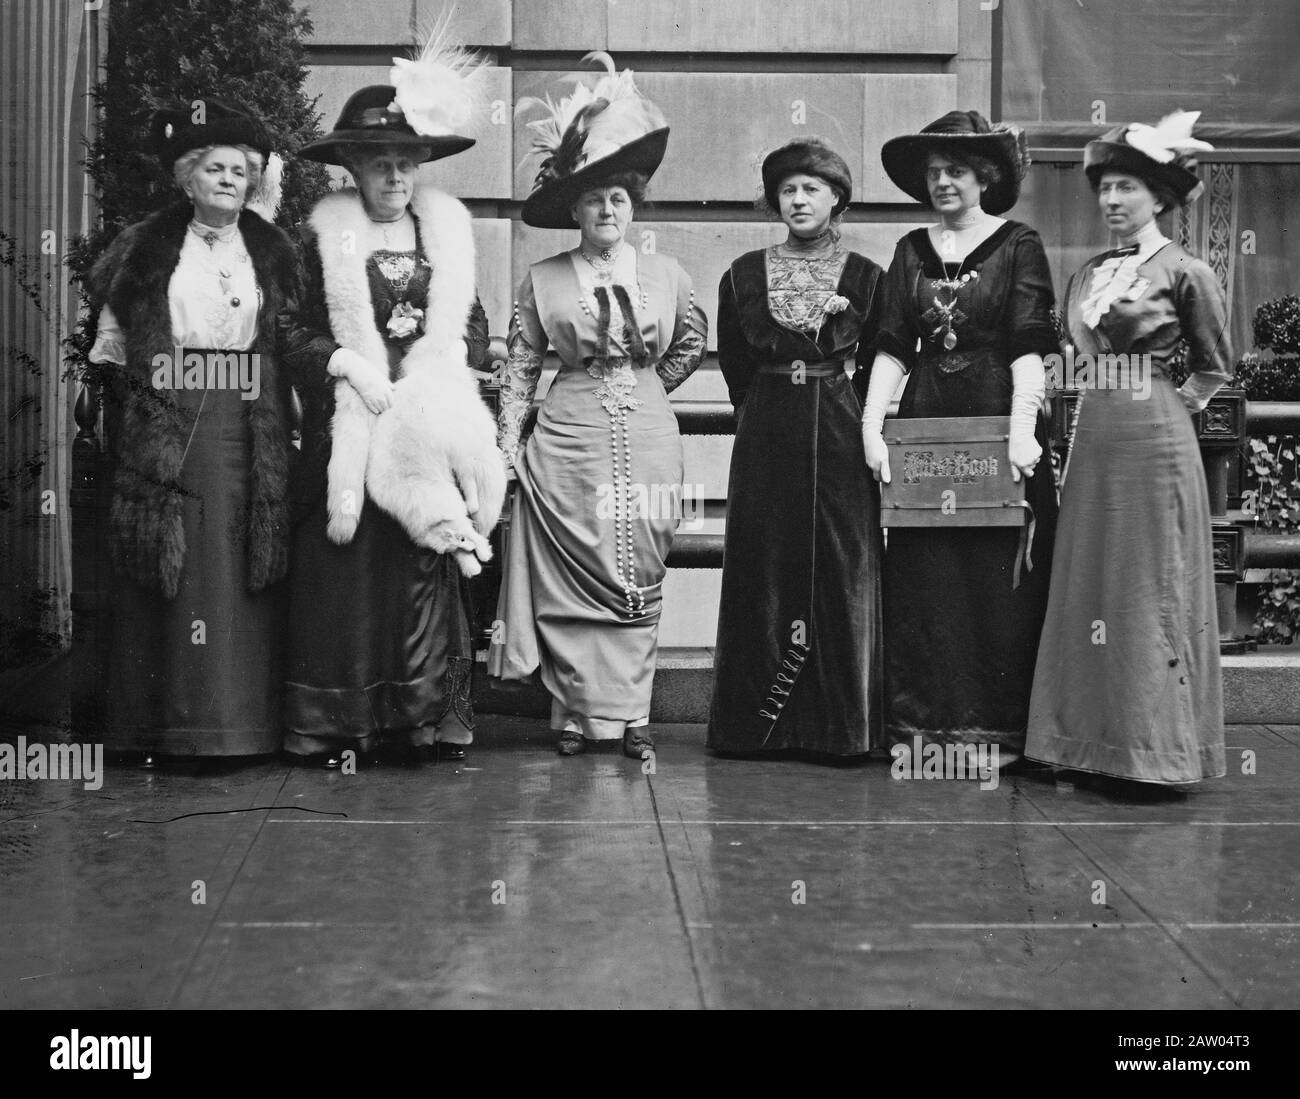 Group of women, possibly board members of the Woman's National Democratic League (WNDL), which Mrs. Crosby founded in 1912. Identified as Nellie Fassett (Mrs. John Sherwin) Crosby, WNDL president; Nettie Goodwin (Mrs. William A.) Cullop, DAR regent and a congressman's wife; Mrs. Steven Beckwith Ayres of New York, active with the WNDL and a congressman's wife; Helen A. (Mrs. John Charles) Linthicum of Baltimore, a congressman's wife; and Louine Childers Tyler (Mrs. Robert Lee) Henry of Texas, a congressman's wife Stock Photo